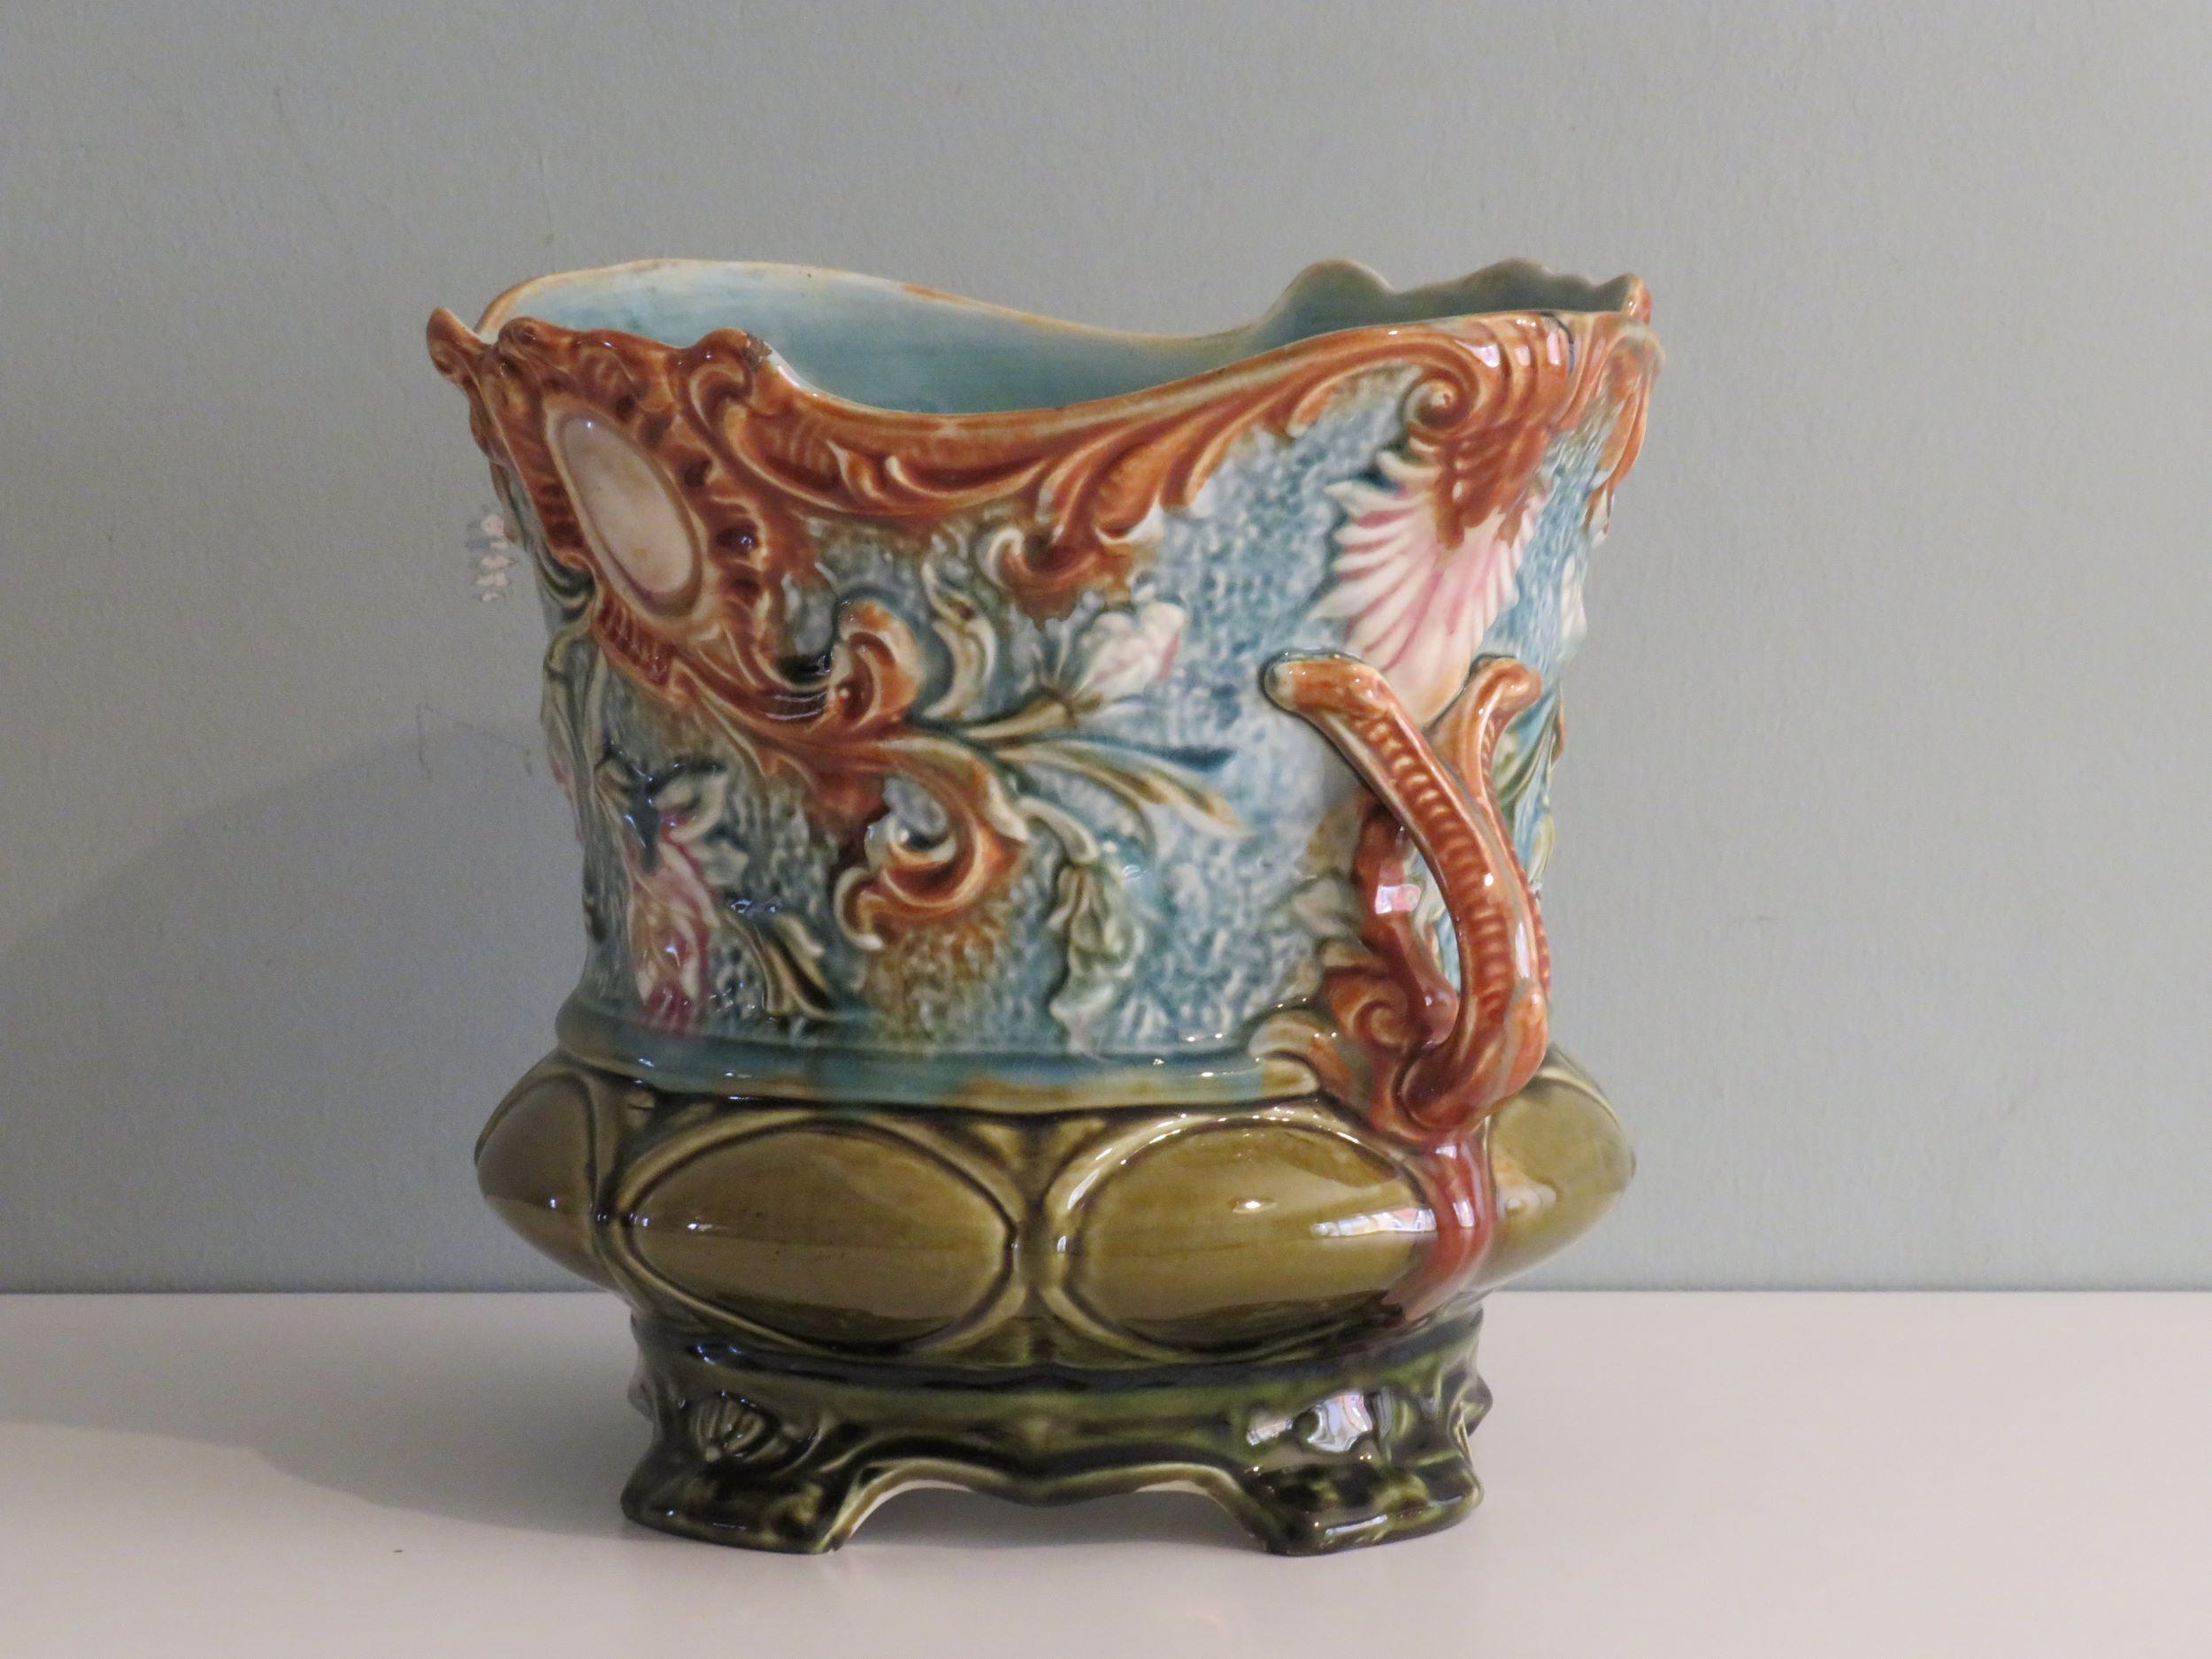 Cache pot in majolica with floral motif.
The cache pot is suitable for an inner pot with maximum dimensions:
H 18 cm, diameter at the bottom 12 cm and diameter at the top 17 cm.
H 7.09 inches, bottom diameter 4.72 inches and top diameter 6.69